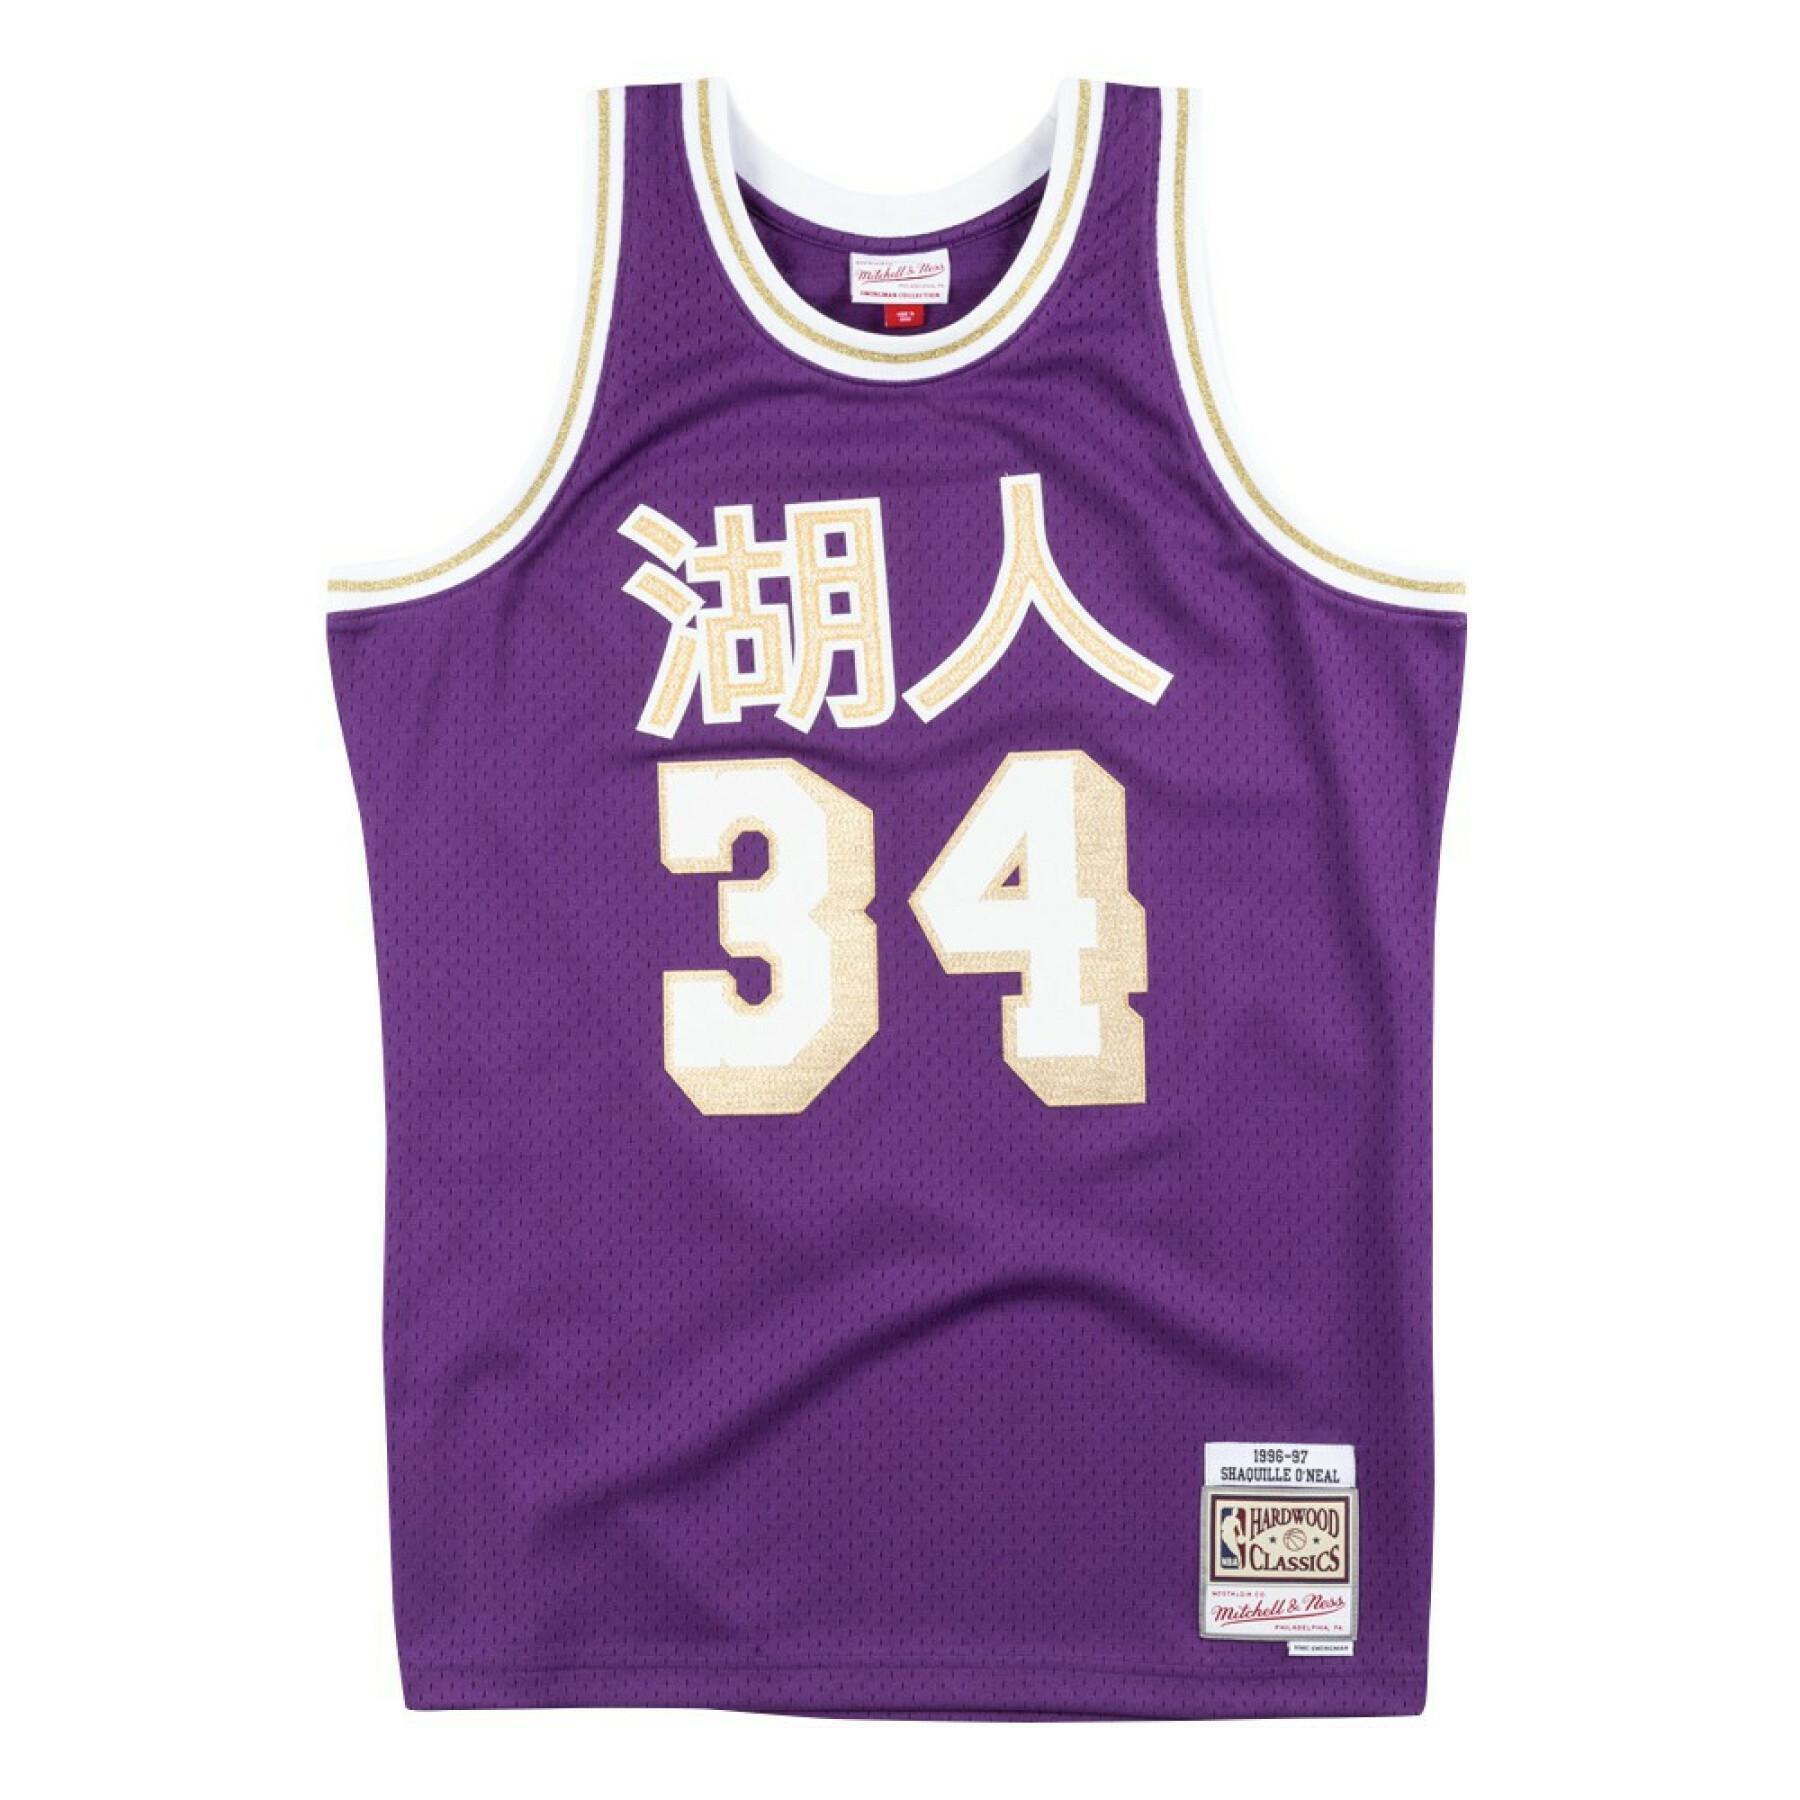 Maillot Mitchell & Ness Cny Los Angeles Lakers